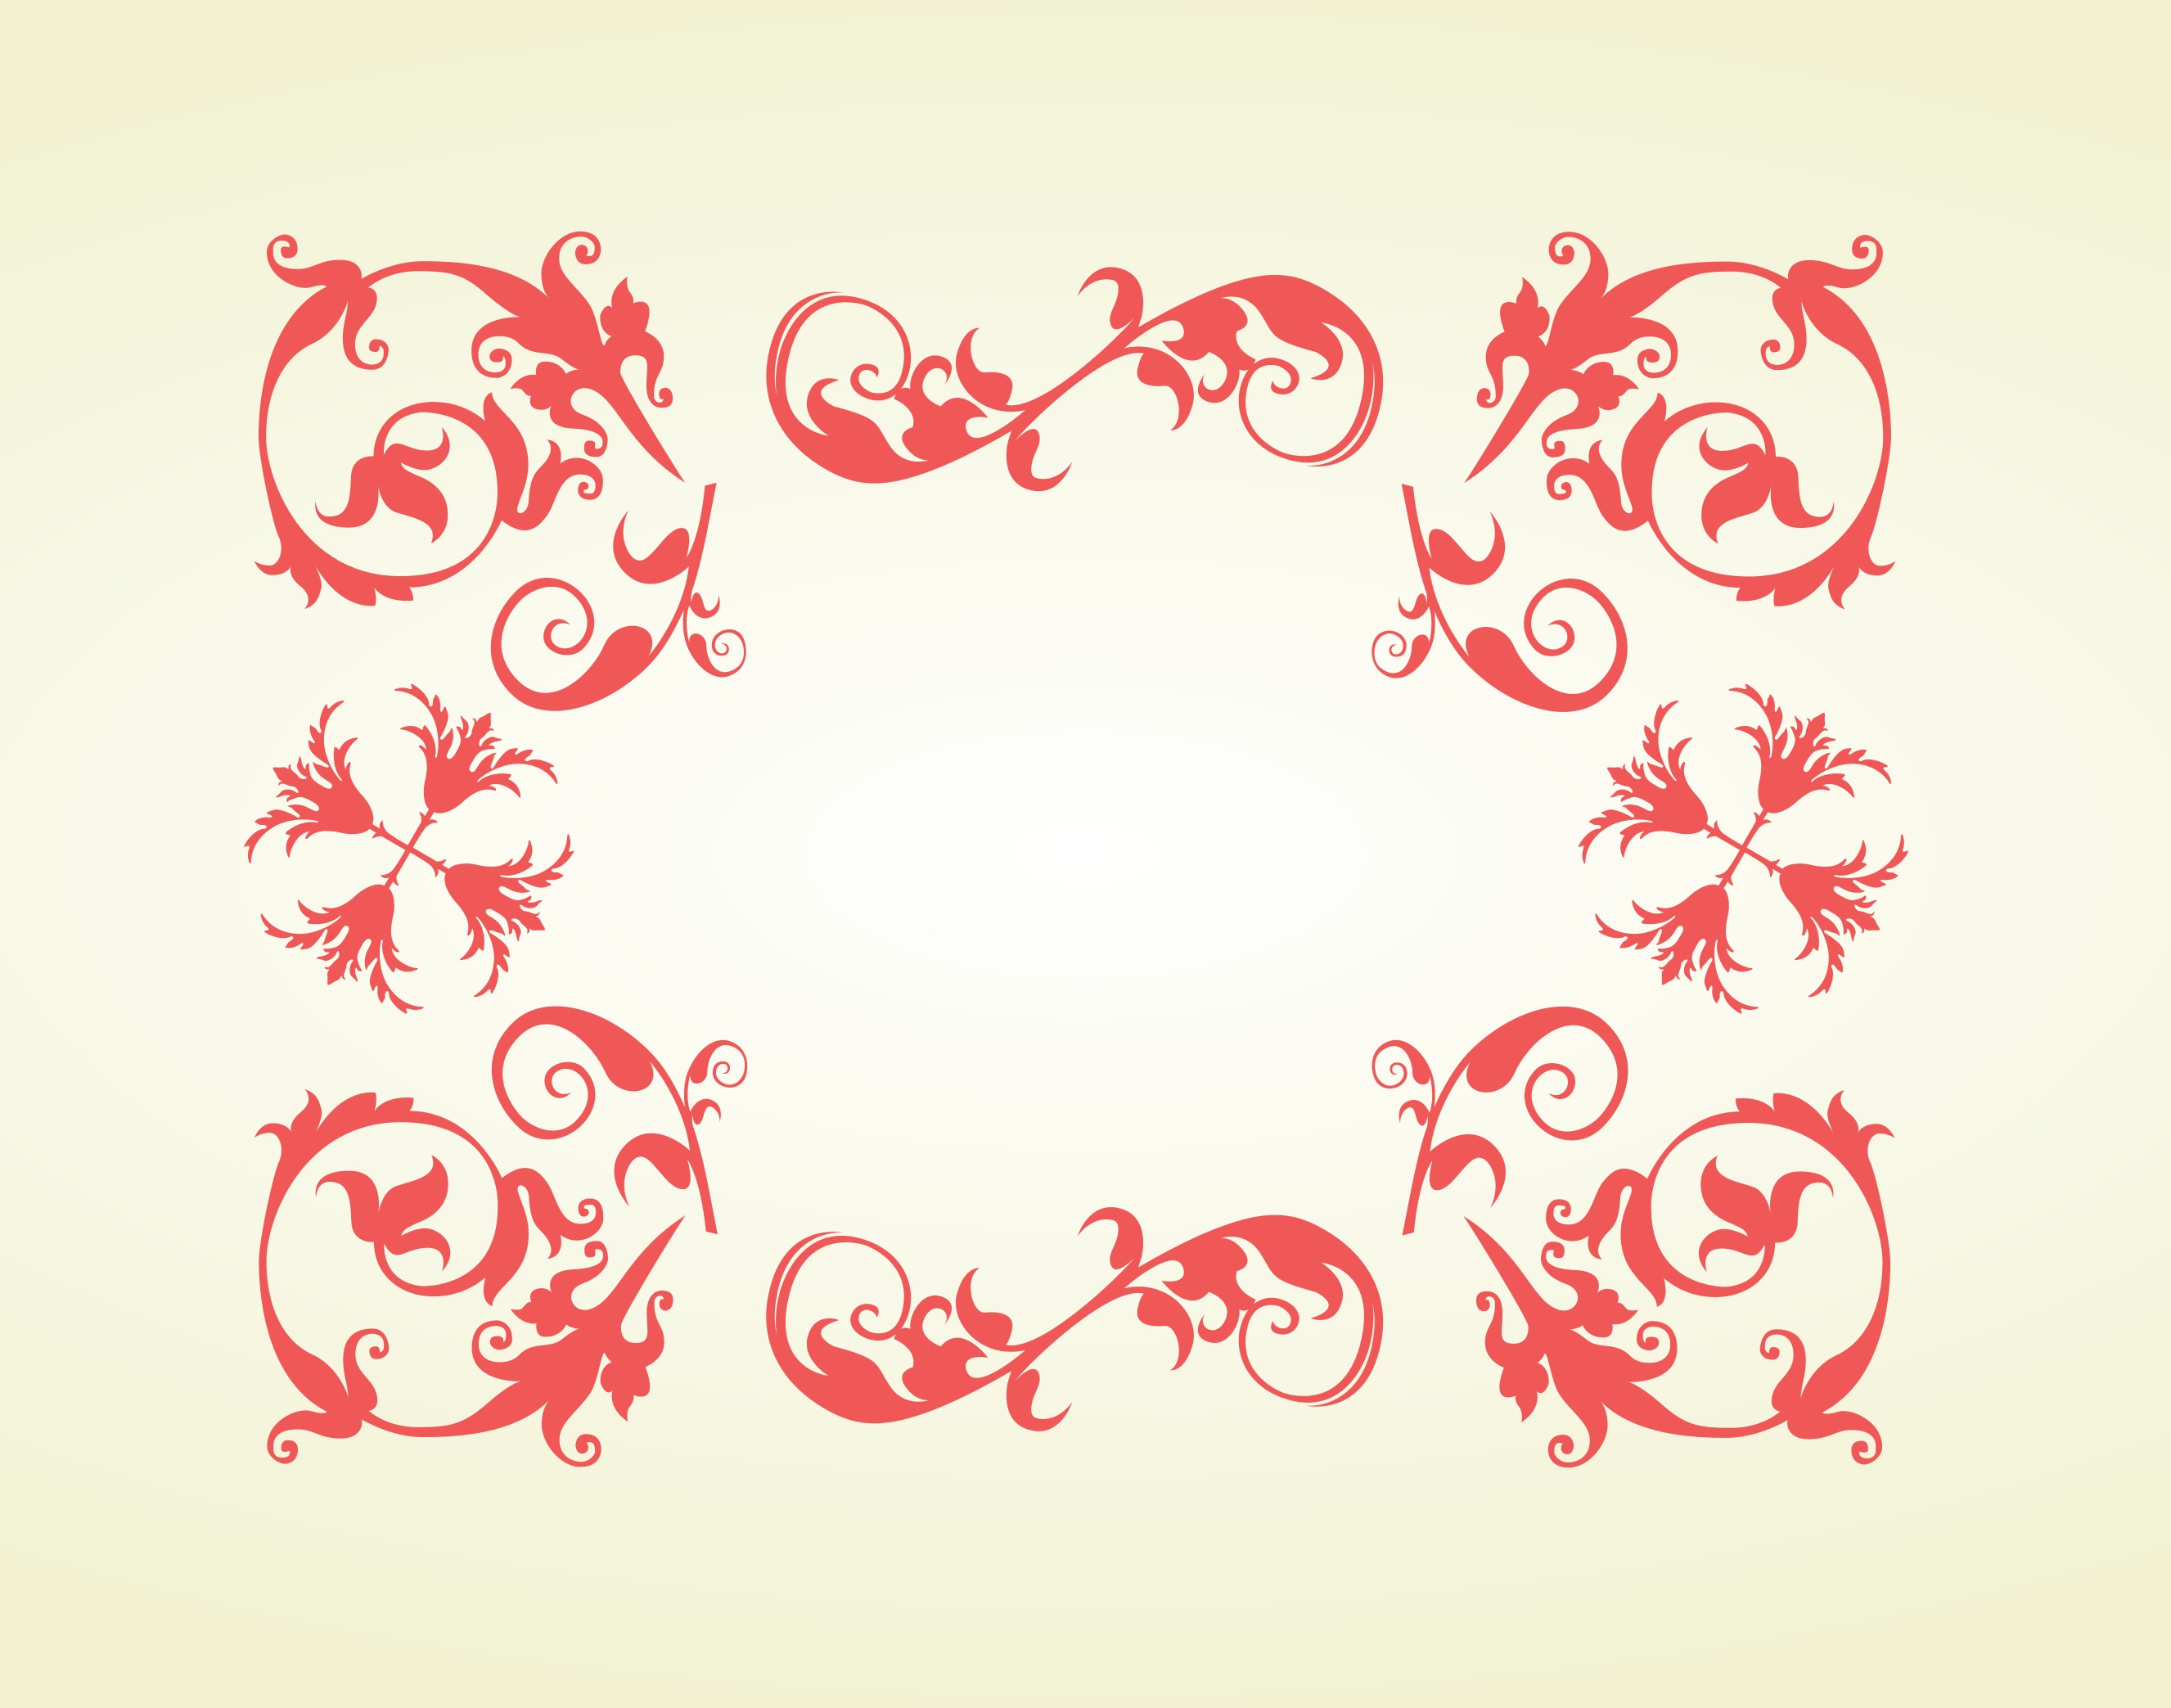 Download Swirly Frame Vector - Download Free Vector Art, Stock ...